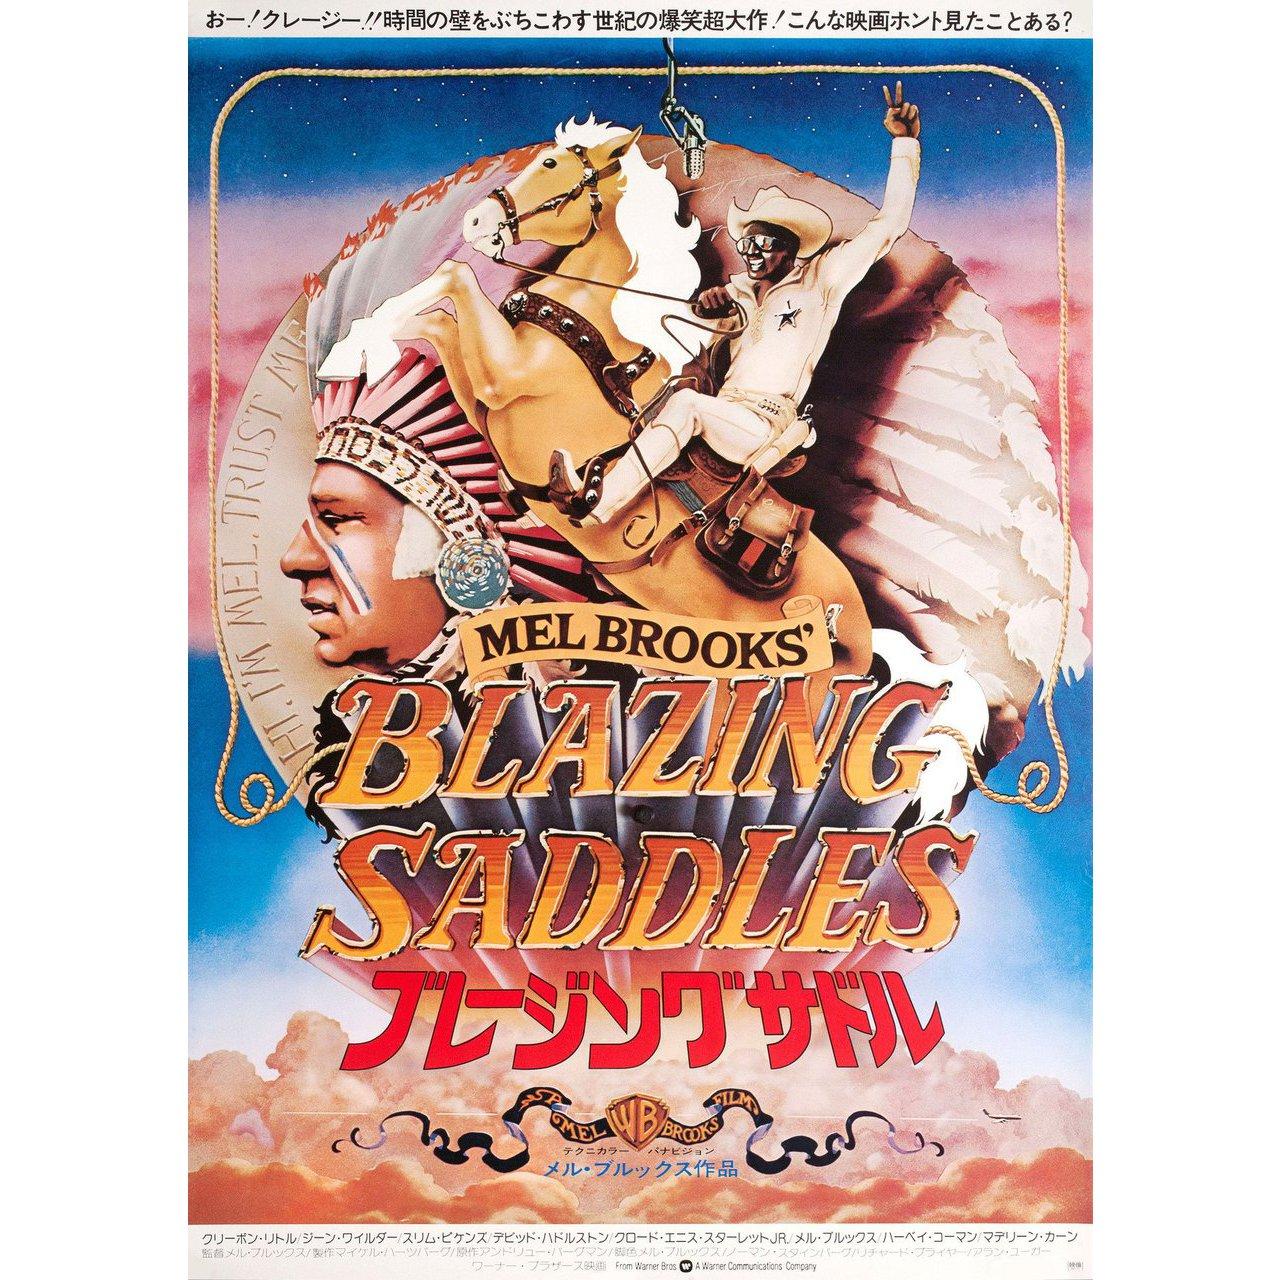 Original 1974 Japanese B2 poster by John Alvin for the film Blazing Saddles directed by Mel Brooks with Cleavon Little / Gene Wilder / Slim Pickens / Harvey Korman. Very good-fine condition, rolled. Please note: the size is stated in inches and the